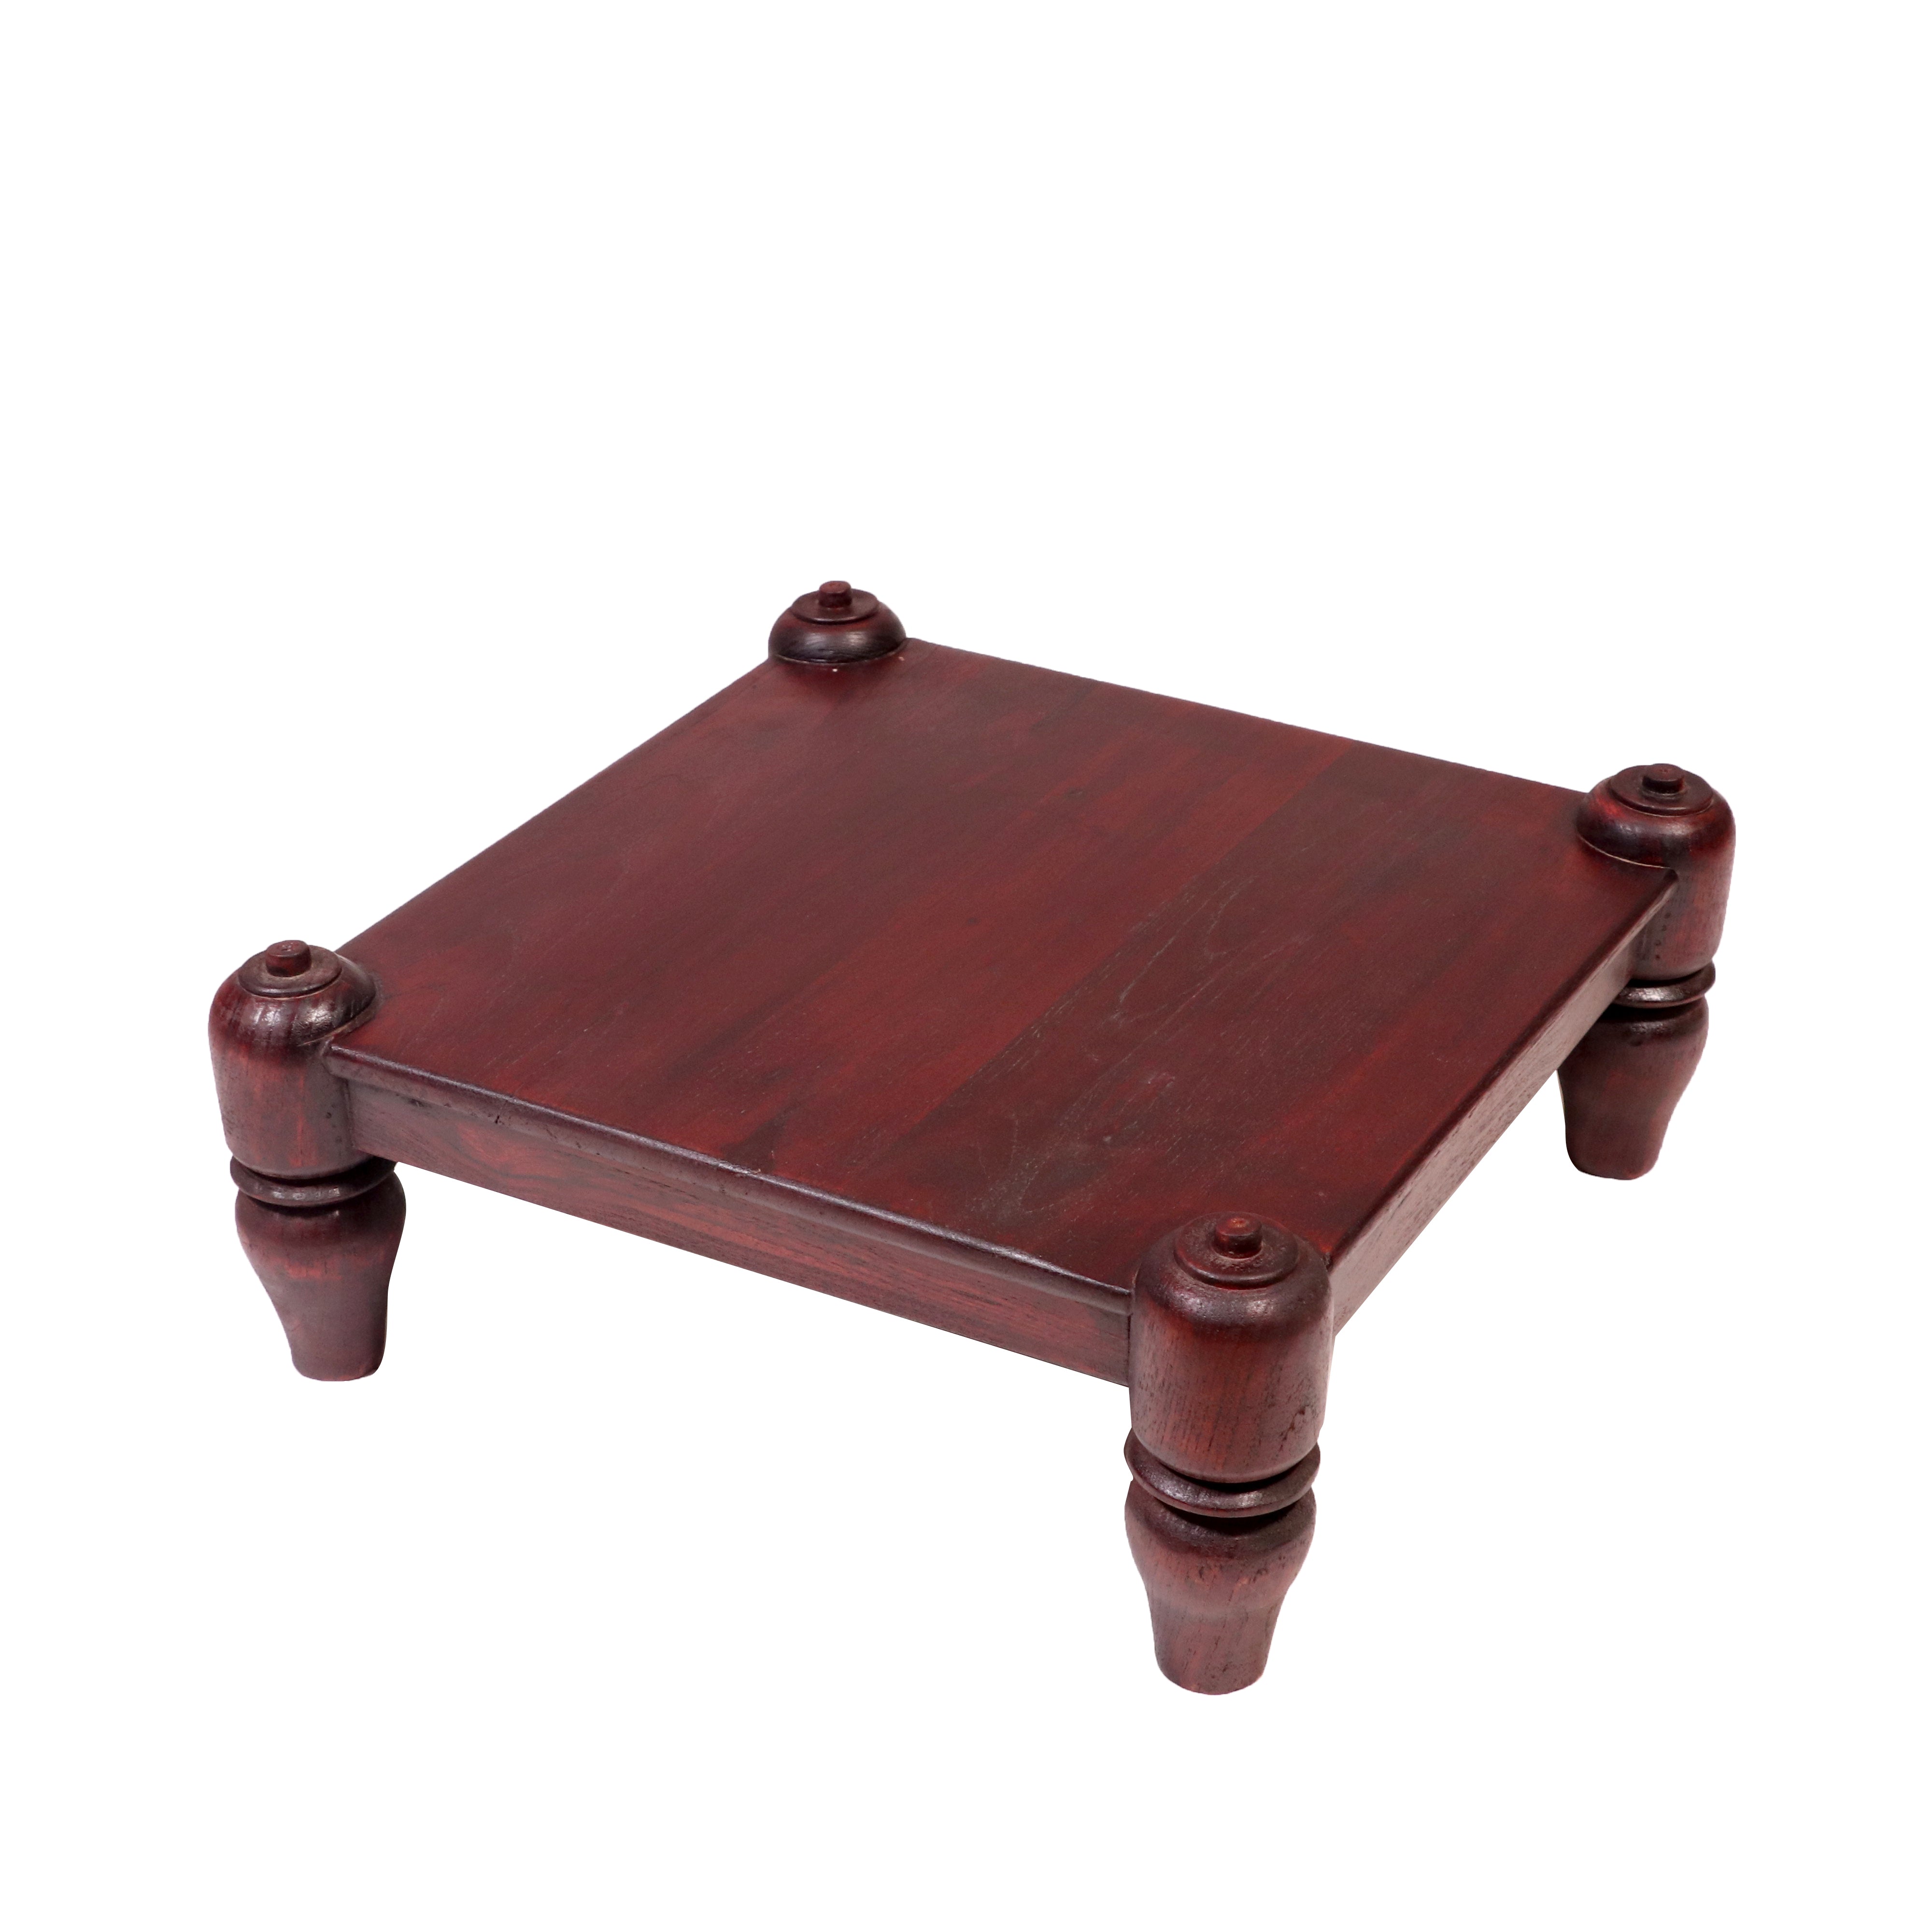 Rounded Corner Wooden Bajot (Mahogany Touch) Bajot